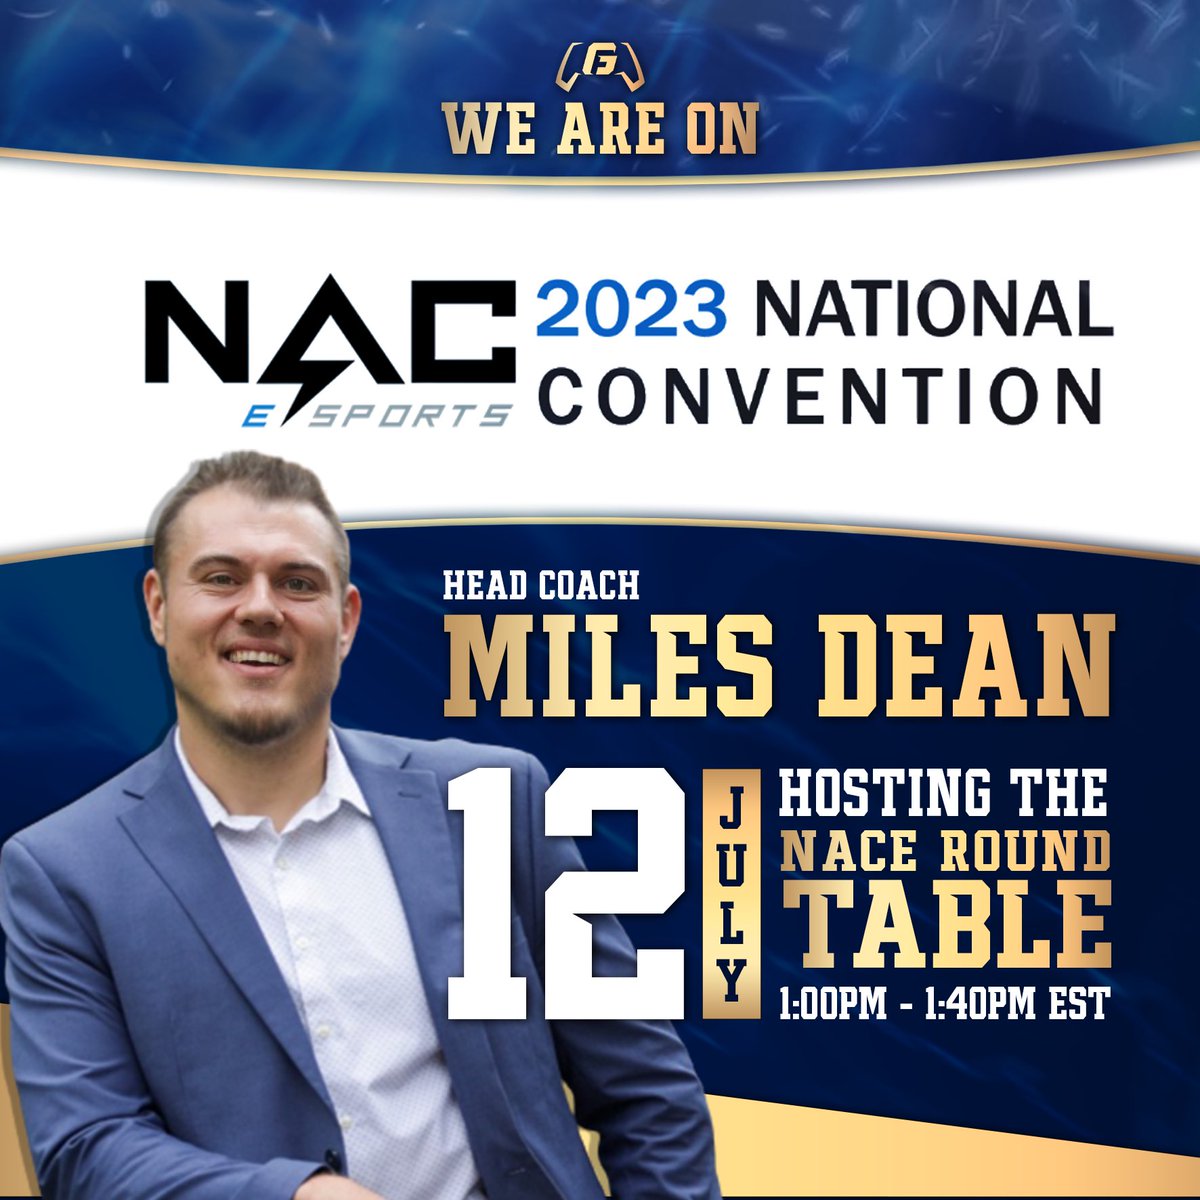 I am hosting a Round Table at @NACEsports Convention this Wednesday. Join the conversation as we have an interesting discussion helping build esports program on campus. Looking forward to seeing all my esports friends.

#esports #esportsindustry #collegiateesports #nace23